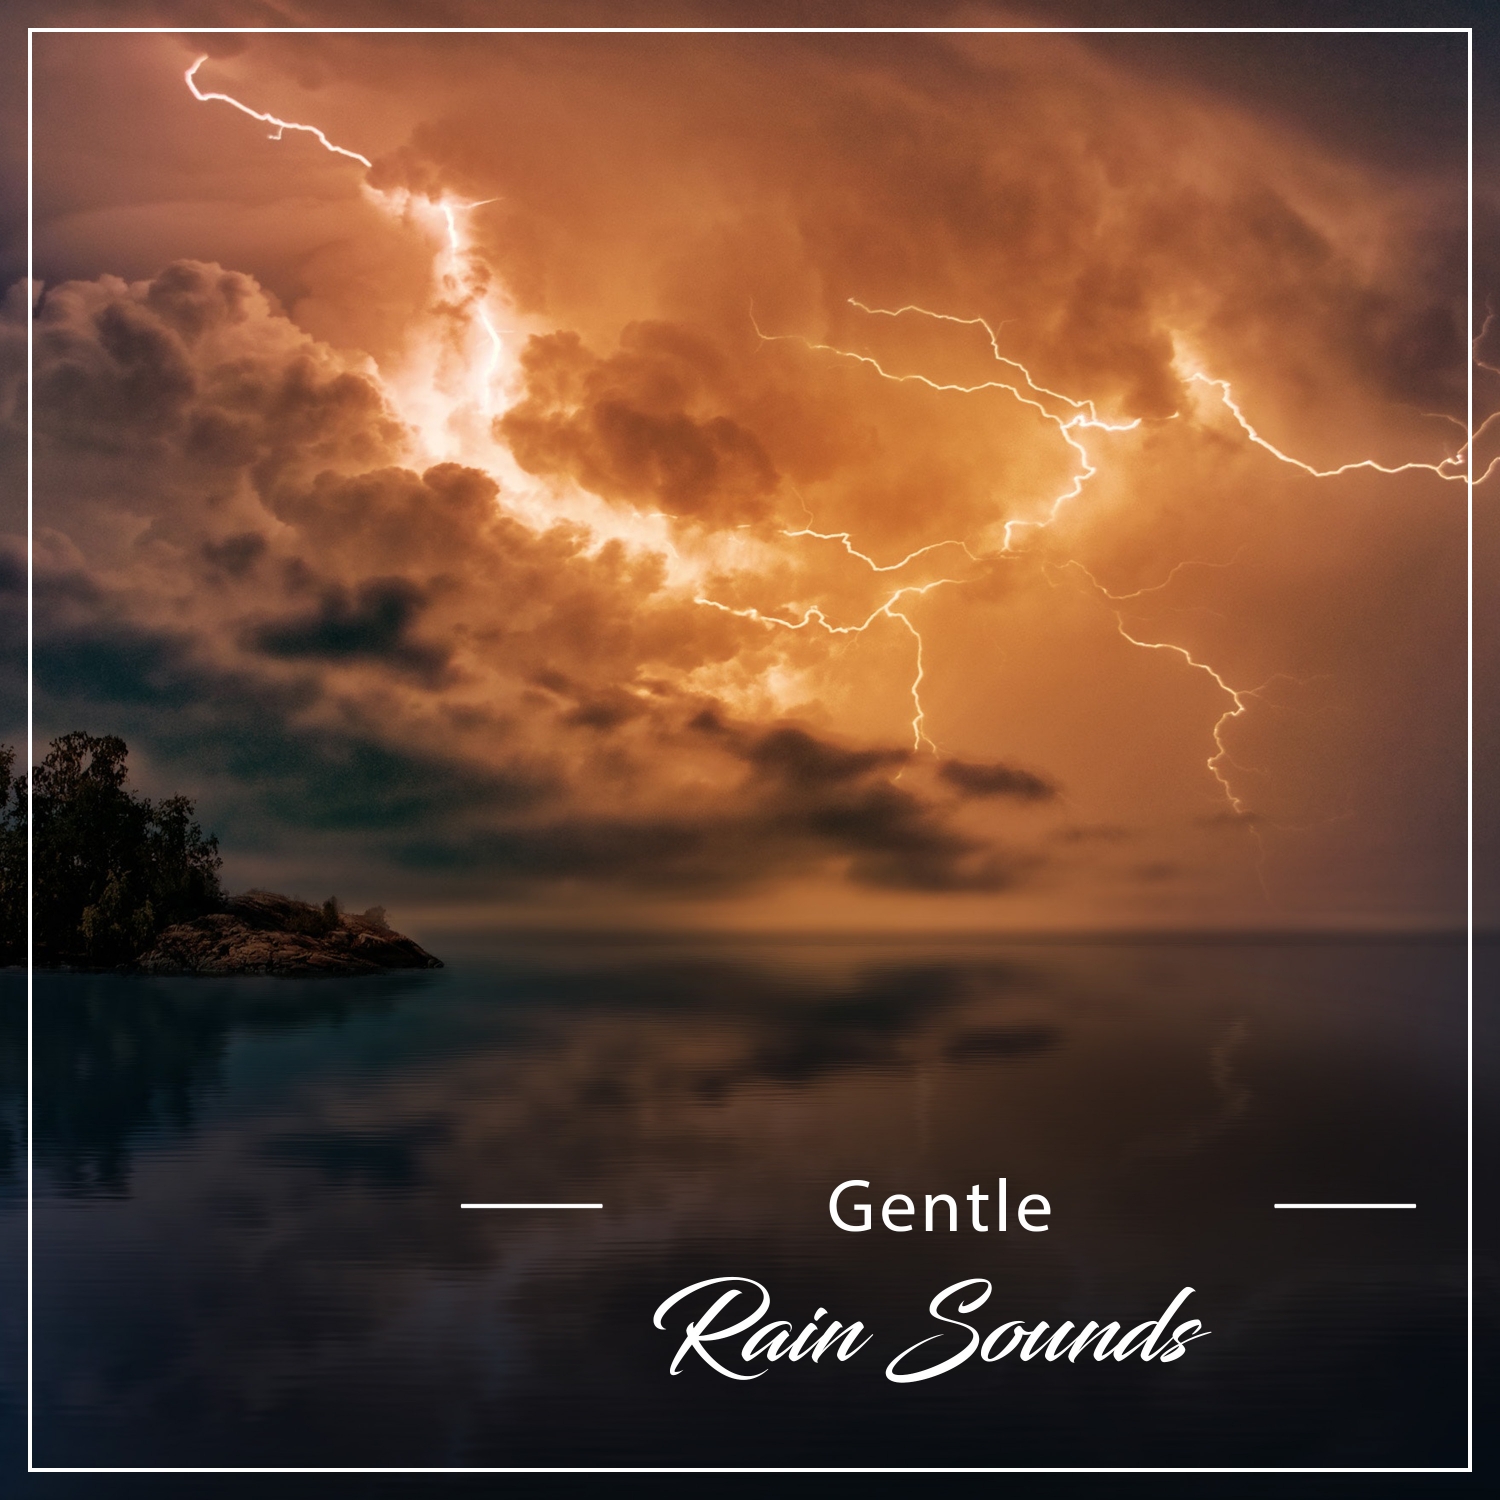 12 Gentle Rain Sounds for Guided Meditation